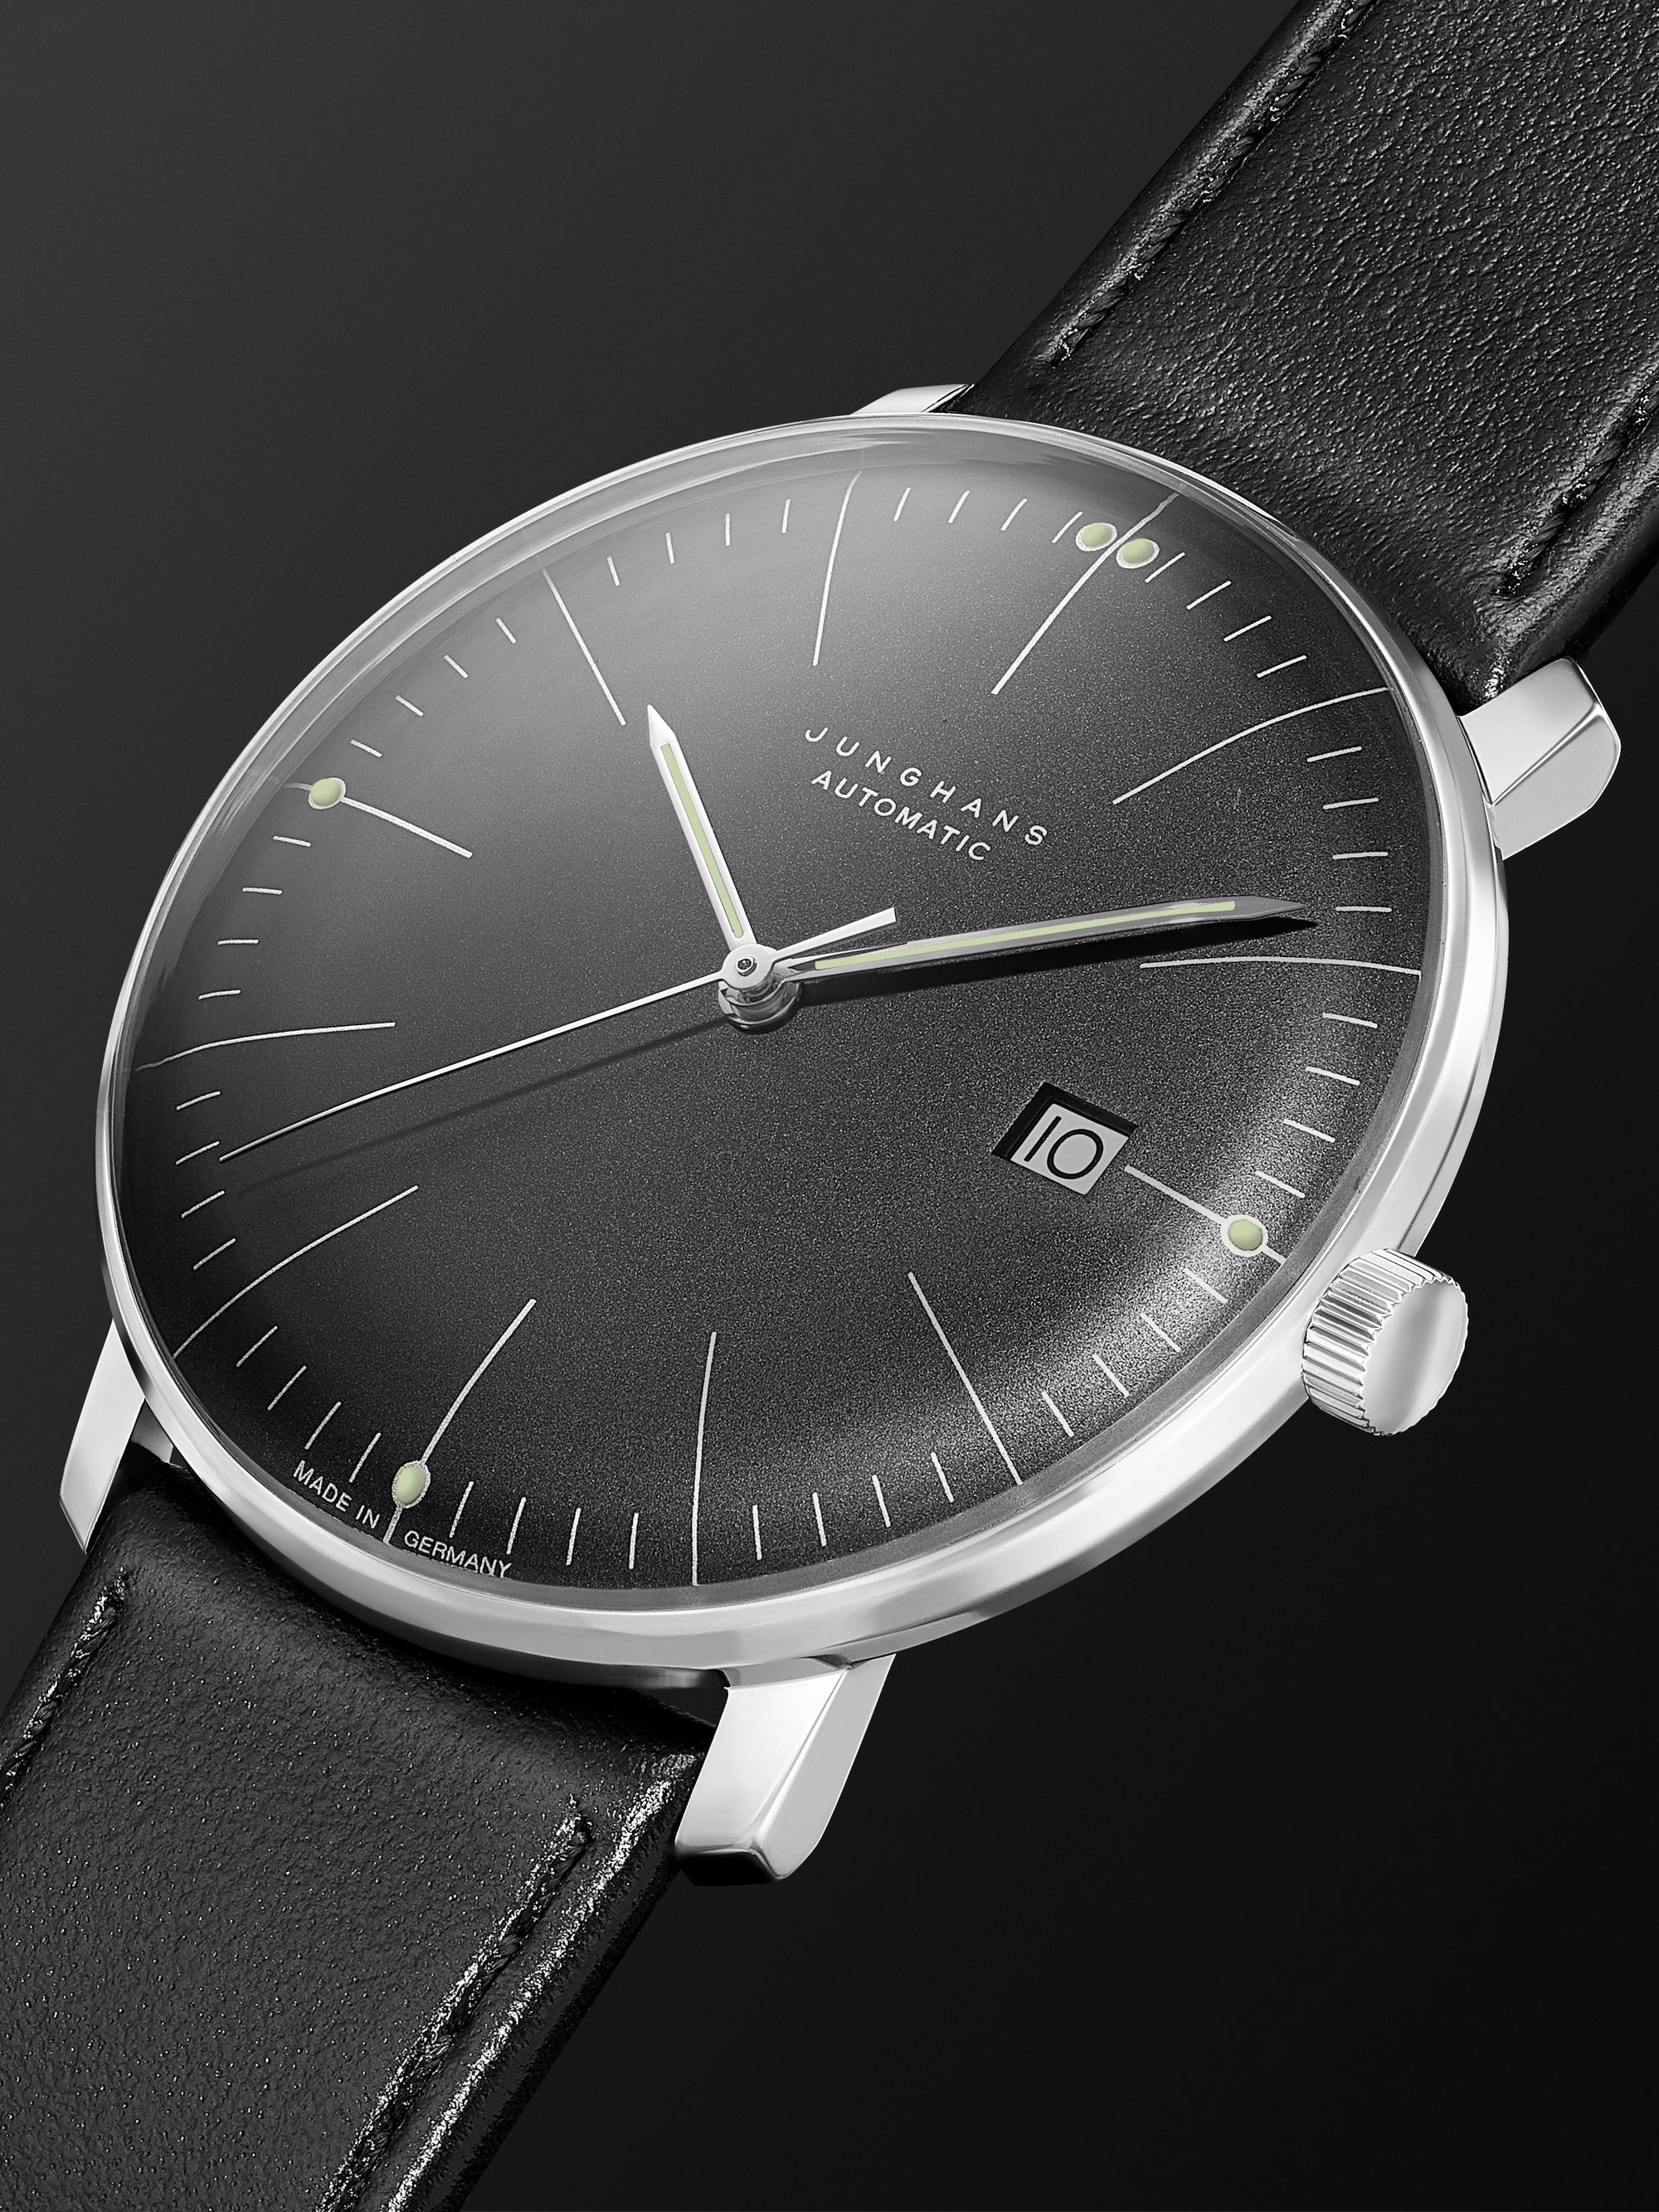 JUNGHANS Max Bill Automatic 38mm Stainless Steel and Leather Watch, Ref. No. 027/4701.02